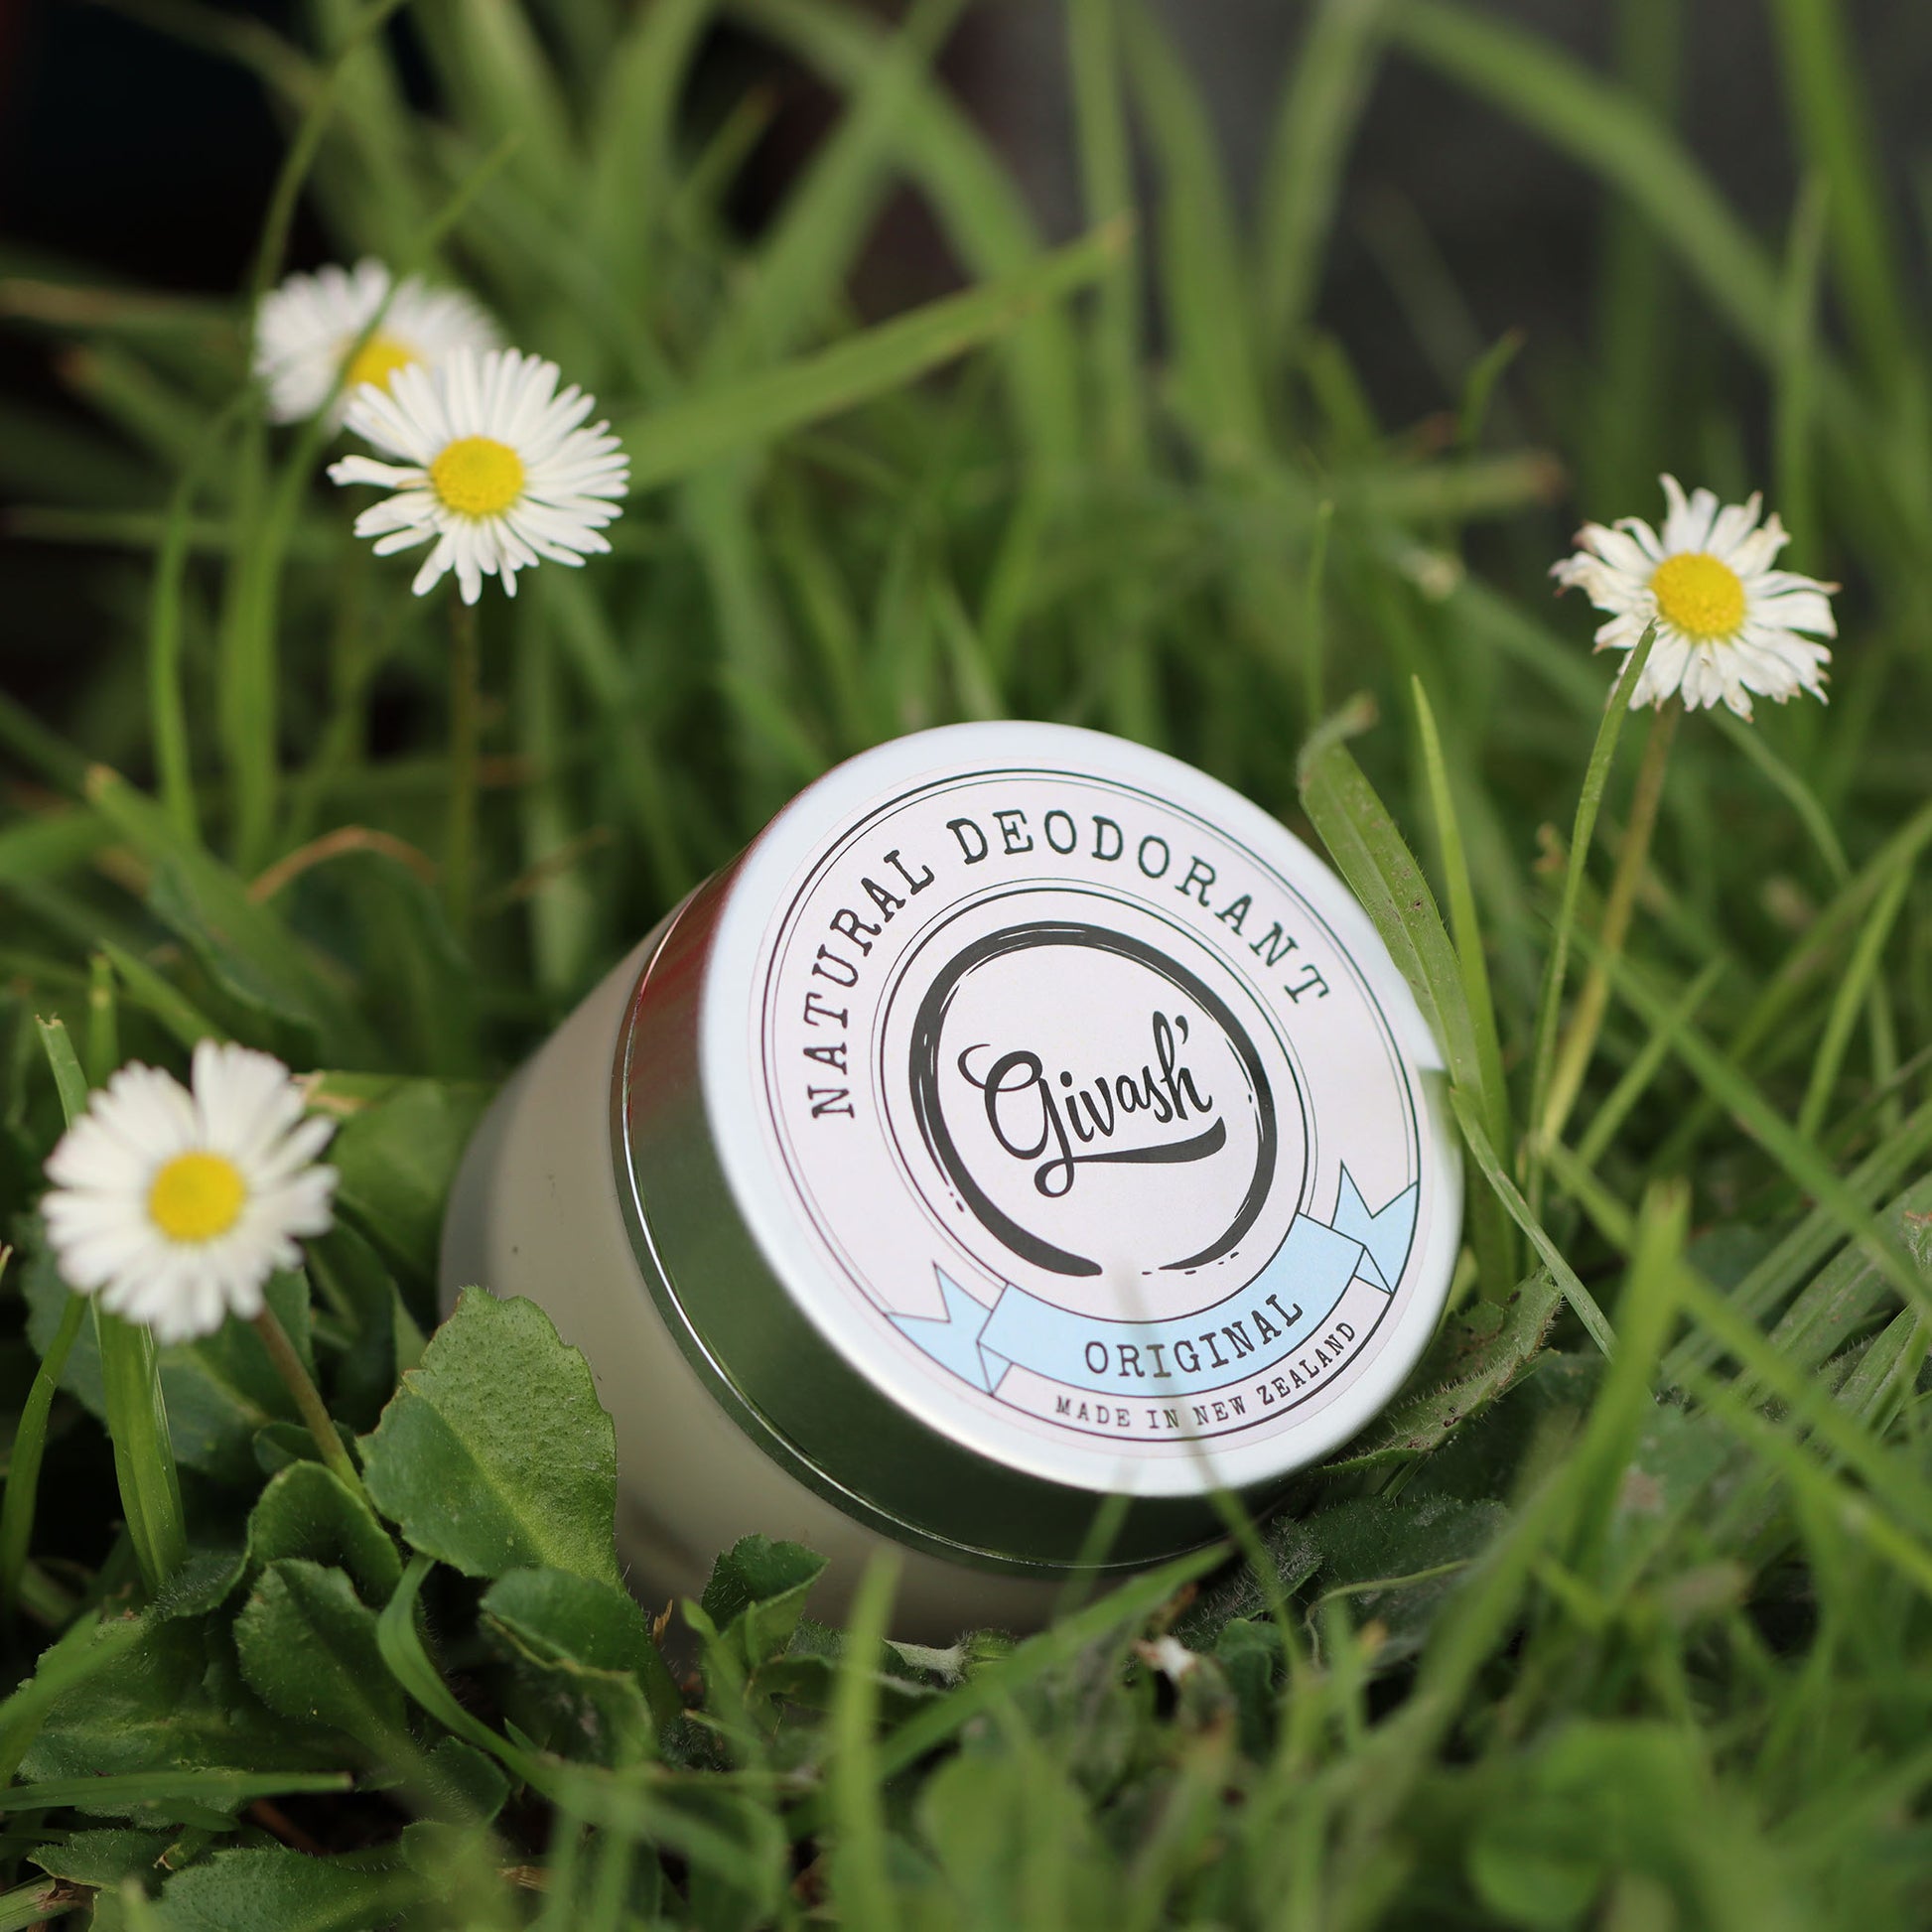 Givash natural deodorant in a jar picture taken sitting in fresh green grass with daisies around it.